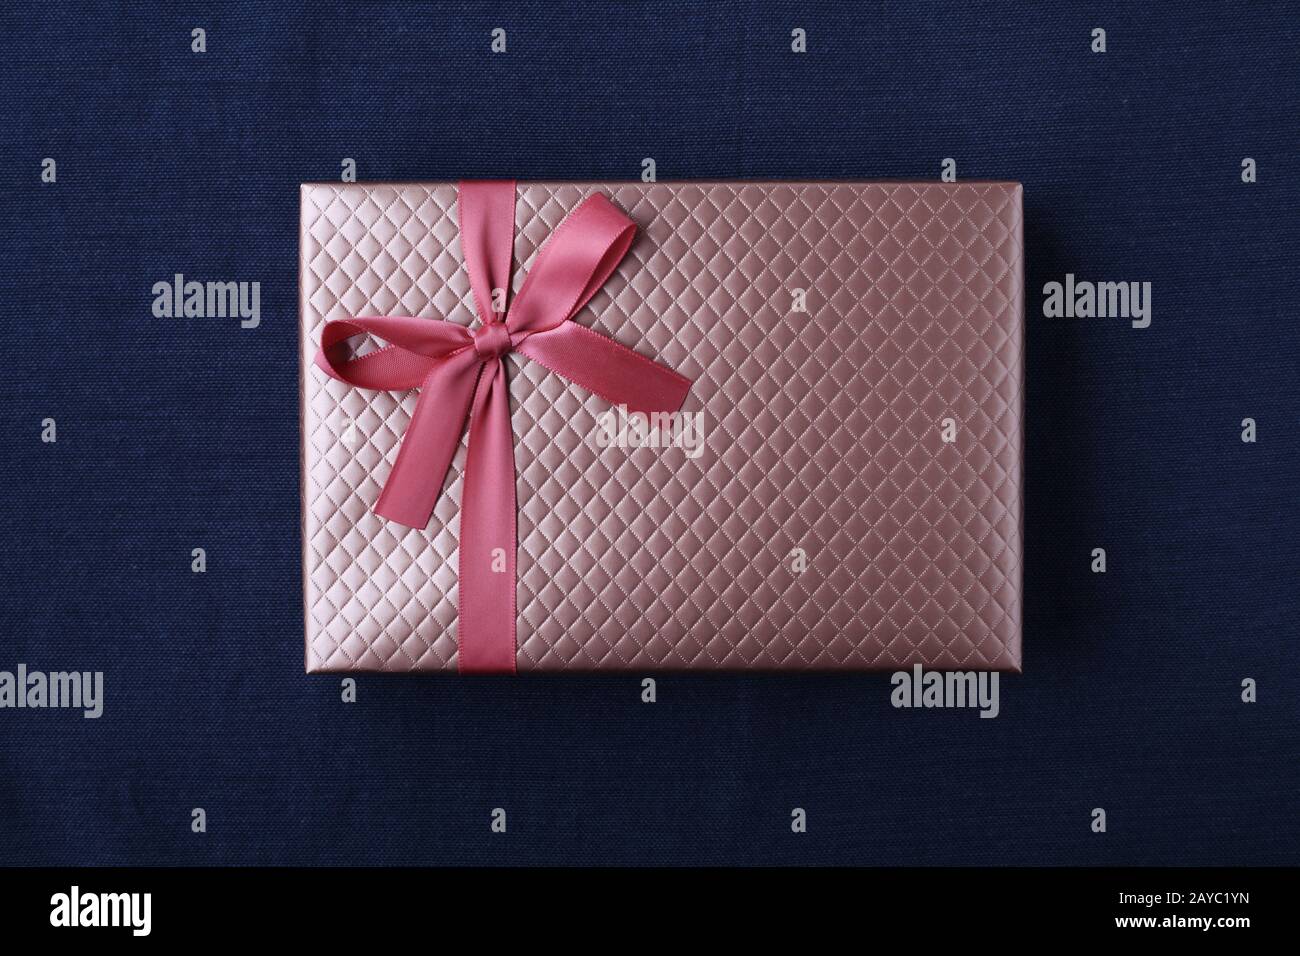 gift present box with ribbon isolated on table cloth Stock Photo